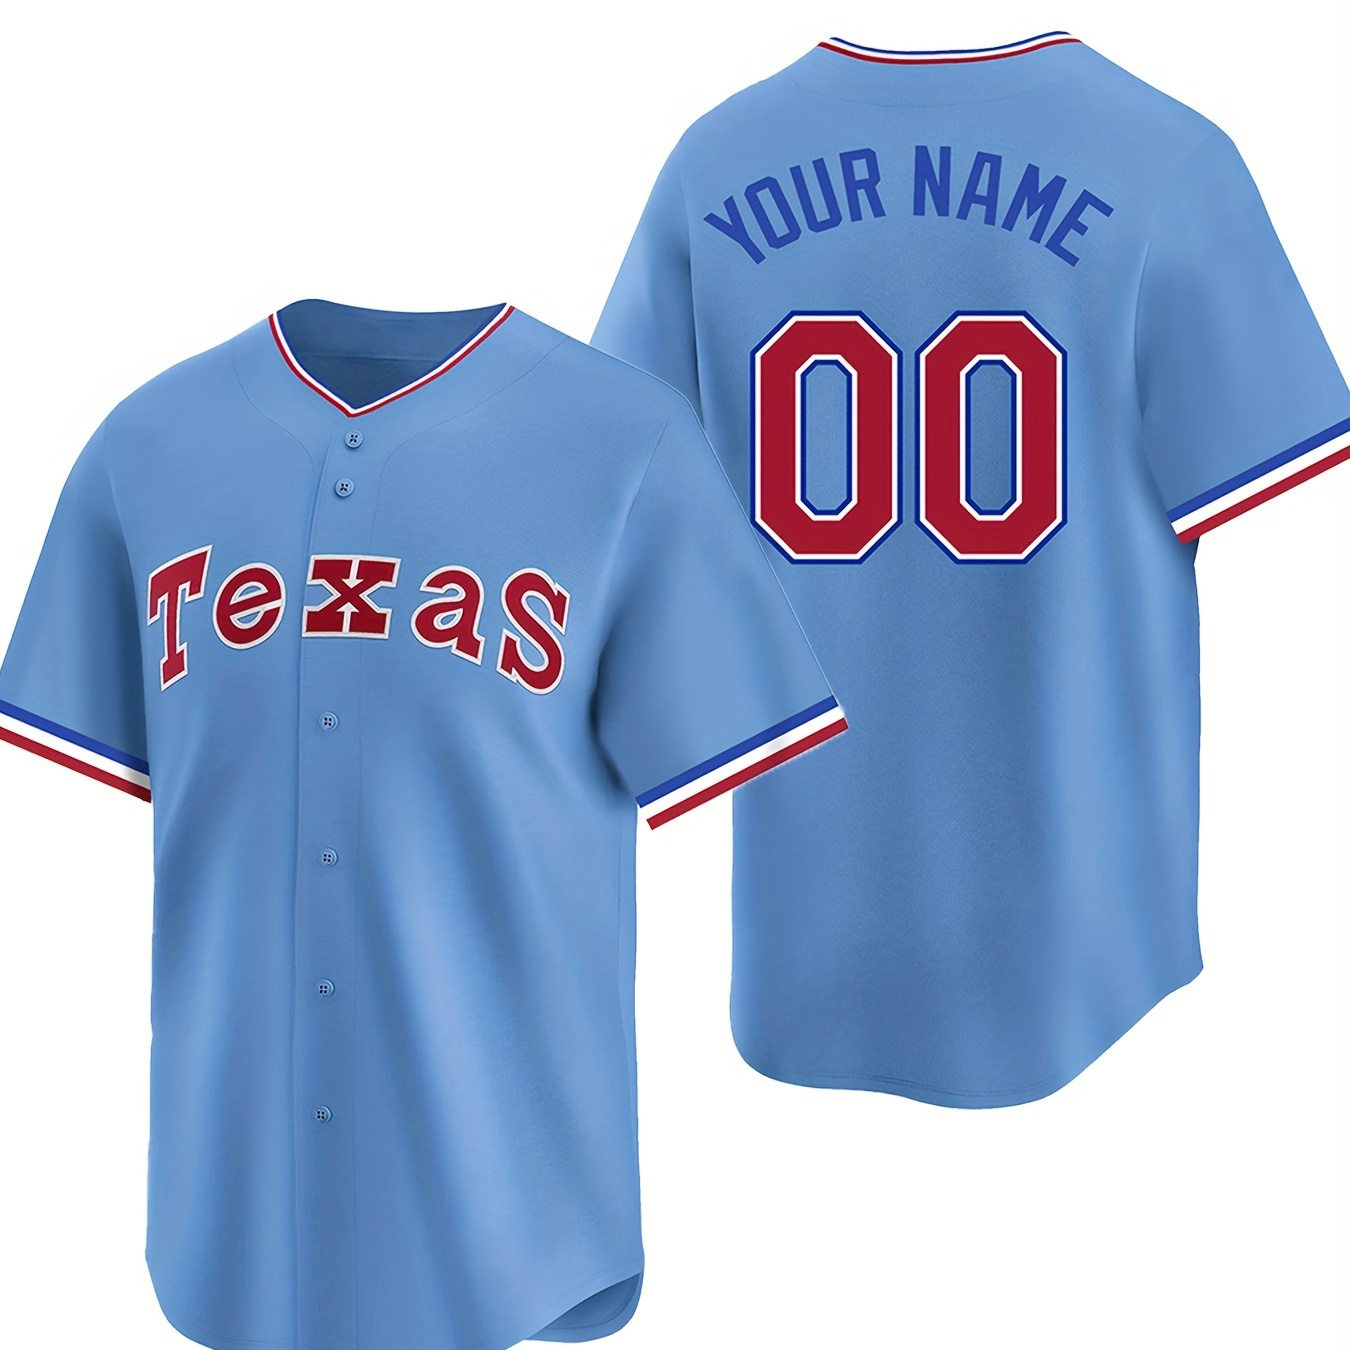 

Texas Letters Print Men's Baseball Jersey V Neck T-shirt, With Customizable Name And Number, Breathable Sports Uniform For Training Competition